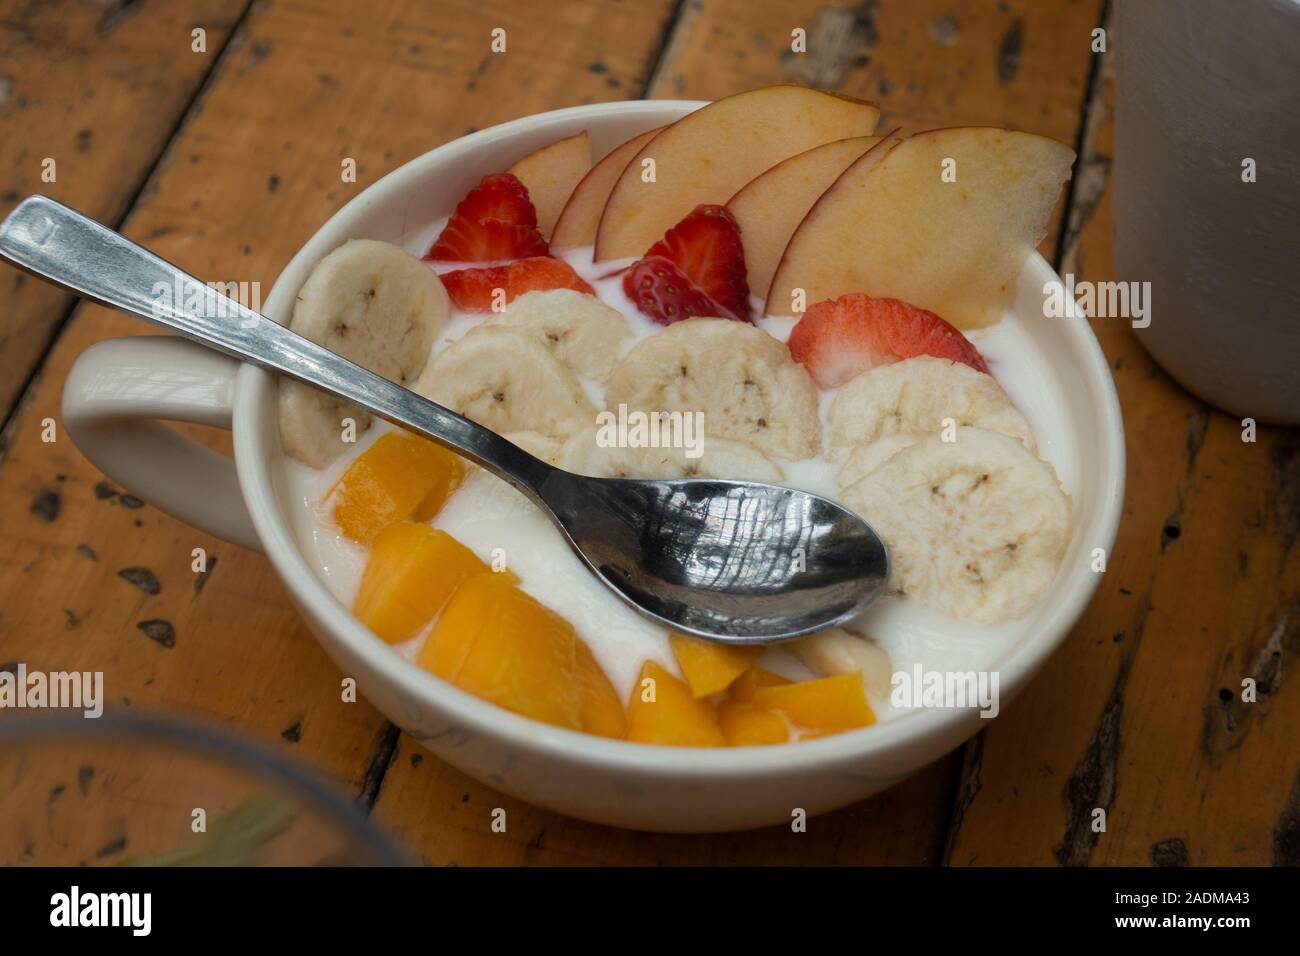 A mug or bowl of fruit ( mango bananas strawberries and apples ) for breakfast in condensed milk Stock Photo